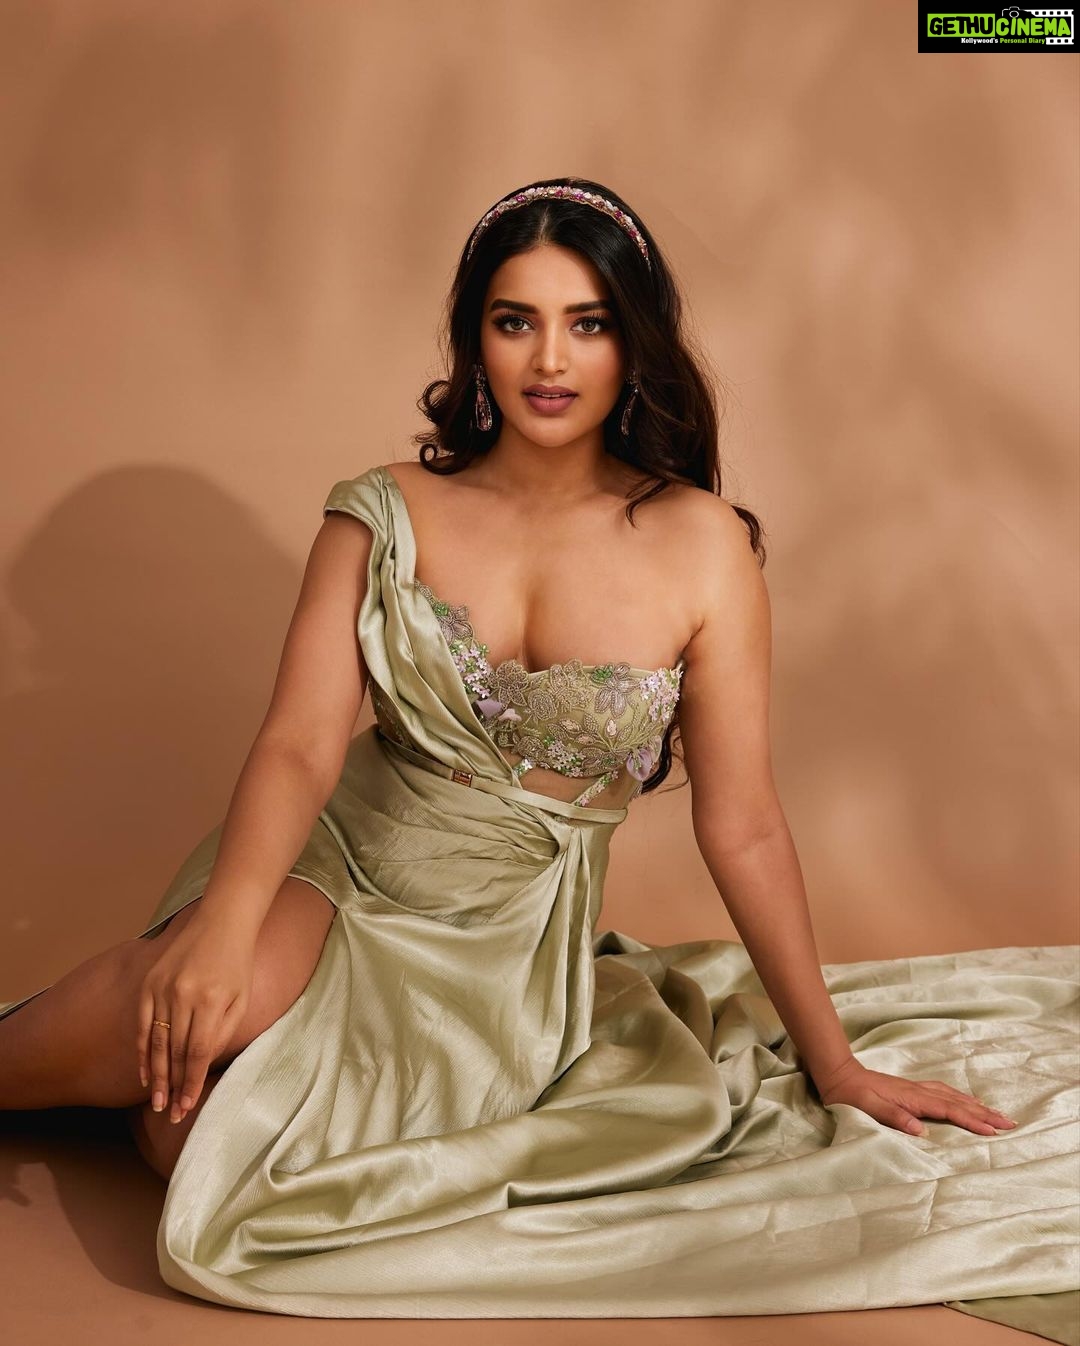 Nidhhi Agerwal - 0.9 Million Likes - Most Liked Instagram Photos